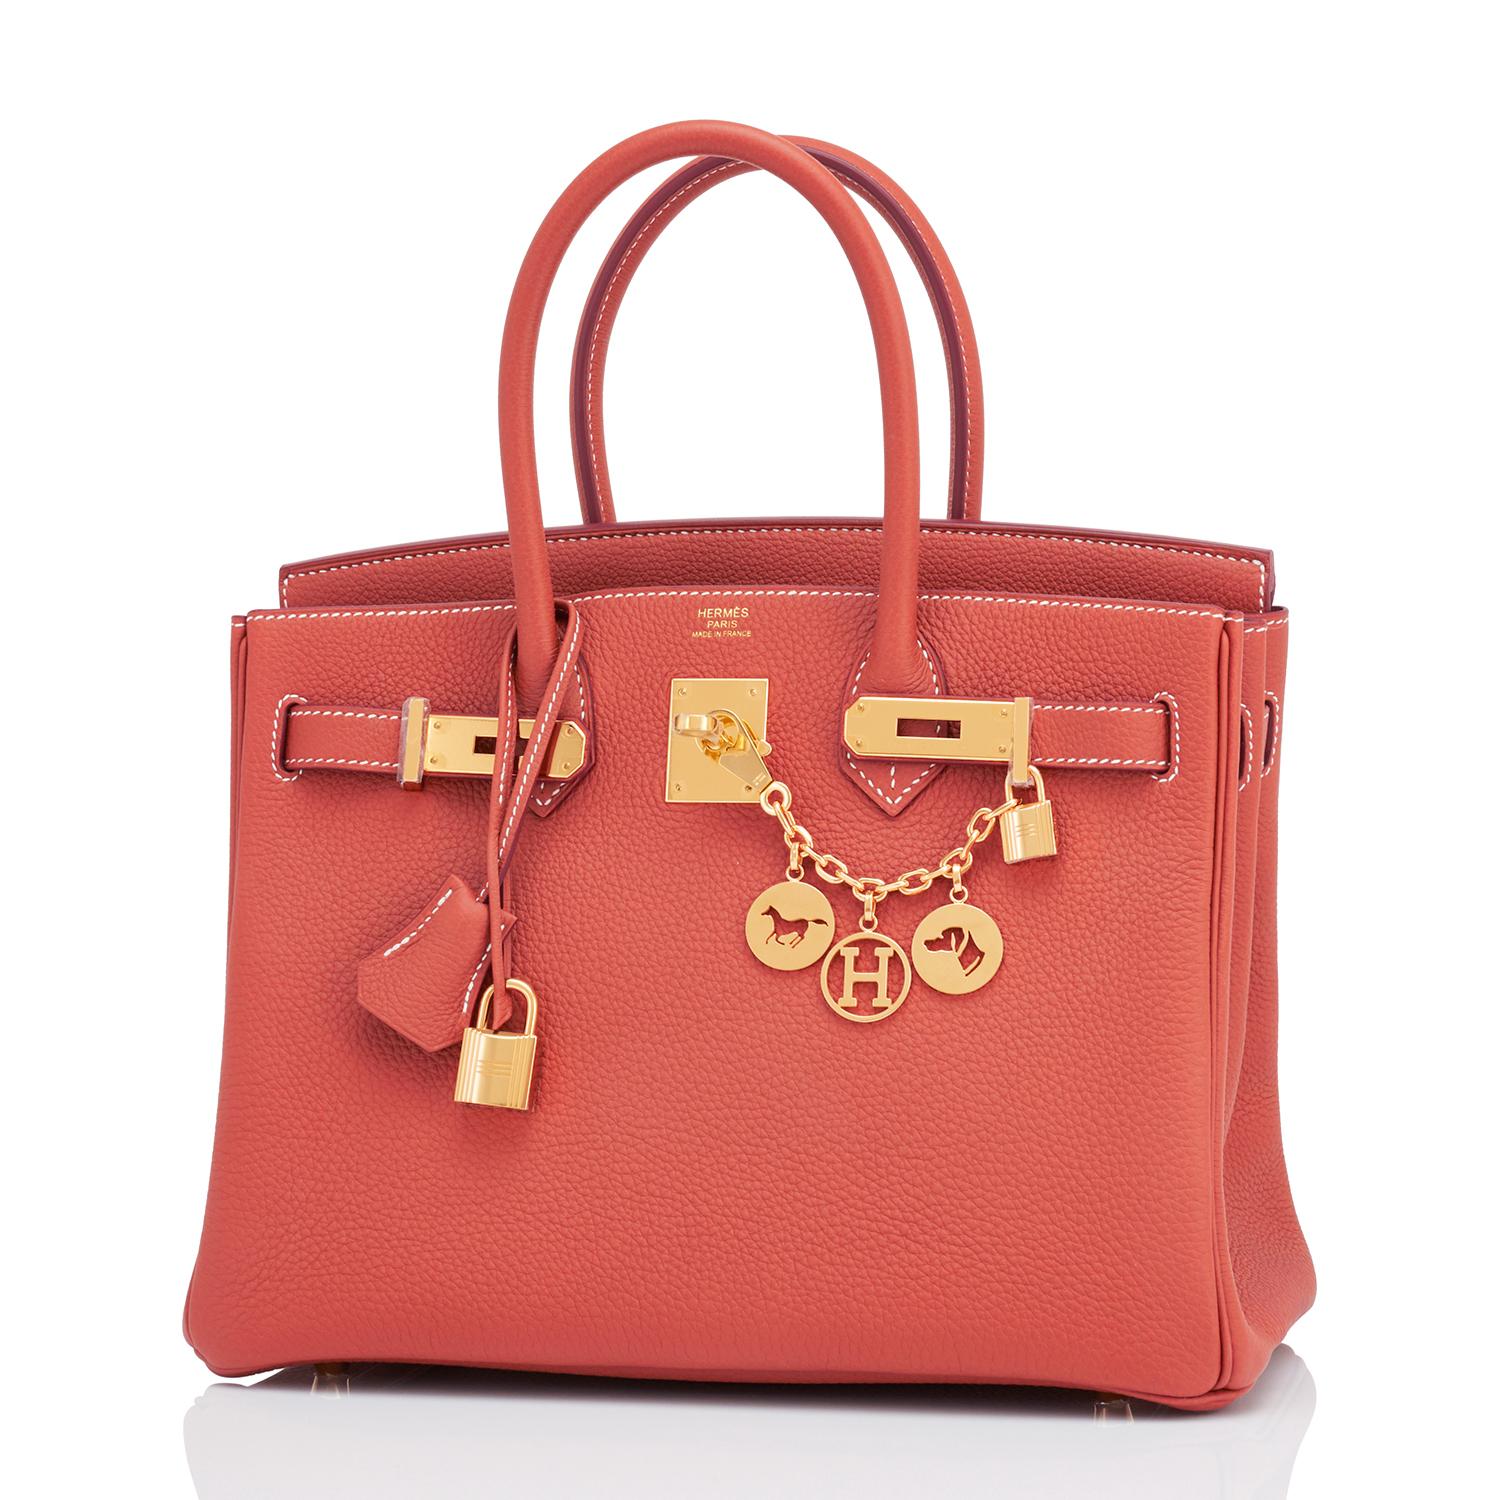 BANK WIRE PRICE ONLY!
Hermes Sanguine Orange Red 30cm Togo Birkin Bag Gold Z Stamp, 2021
Just purchased from Hermes store! Bag bears new interior 2021 Z Stamp.
Brand New in Box. Store Fresh. Pristine Condition (with plastic on hardware)
Perfect